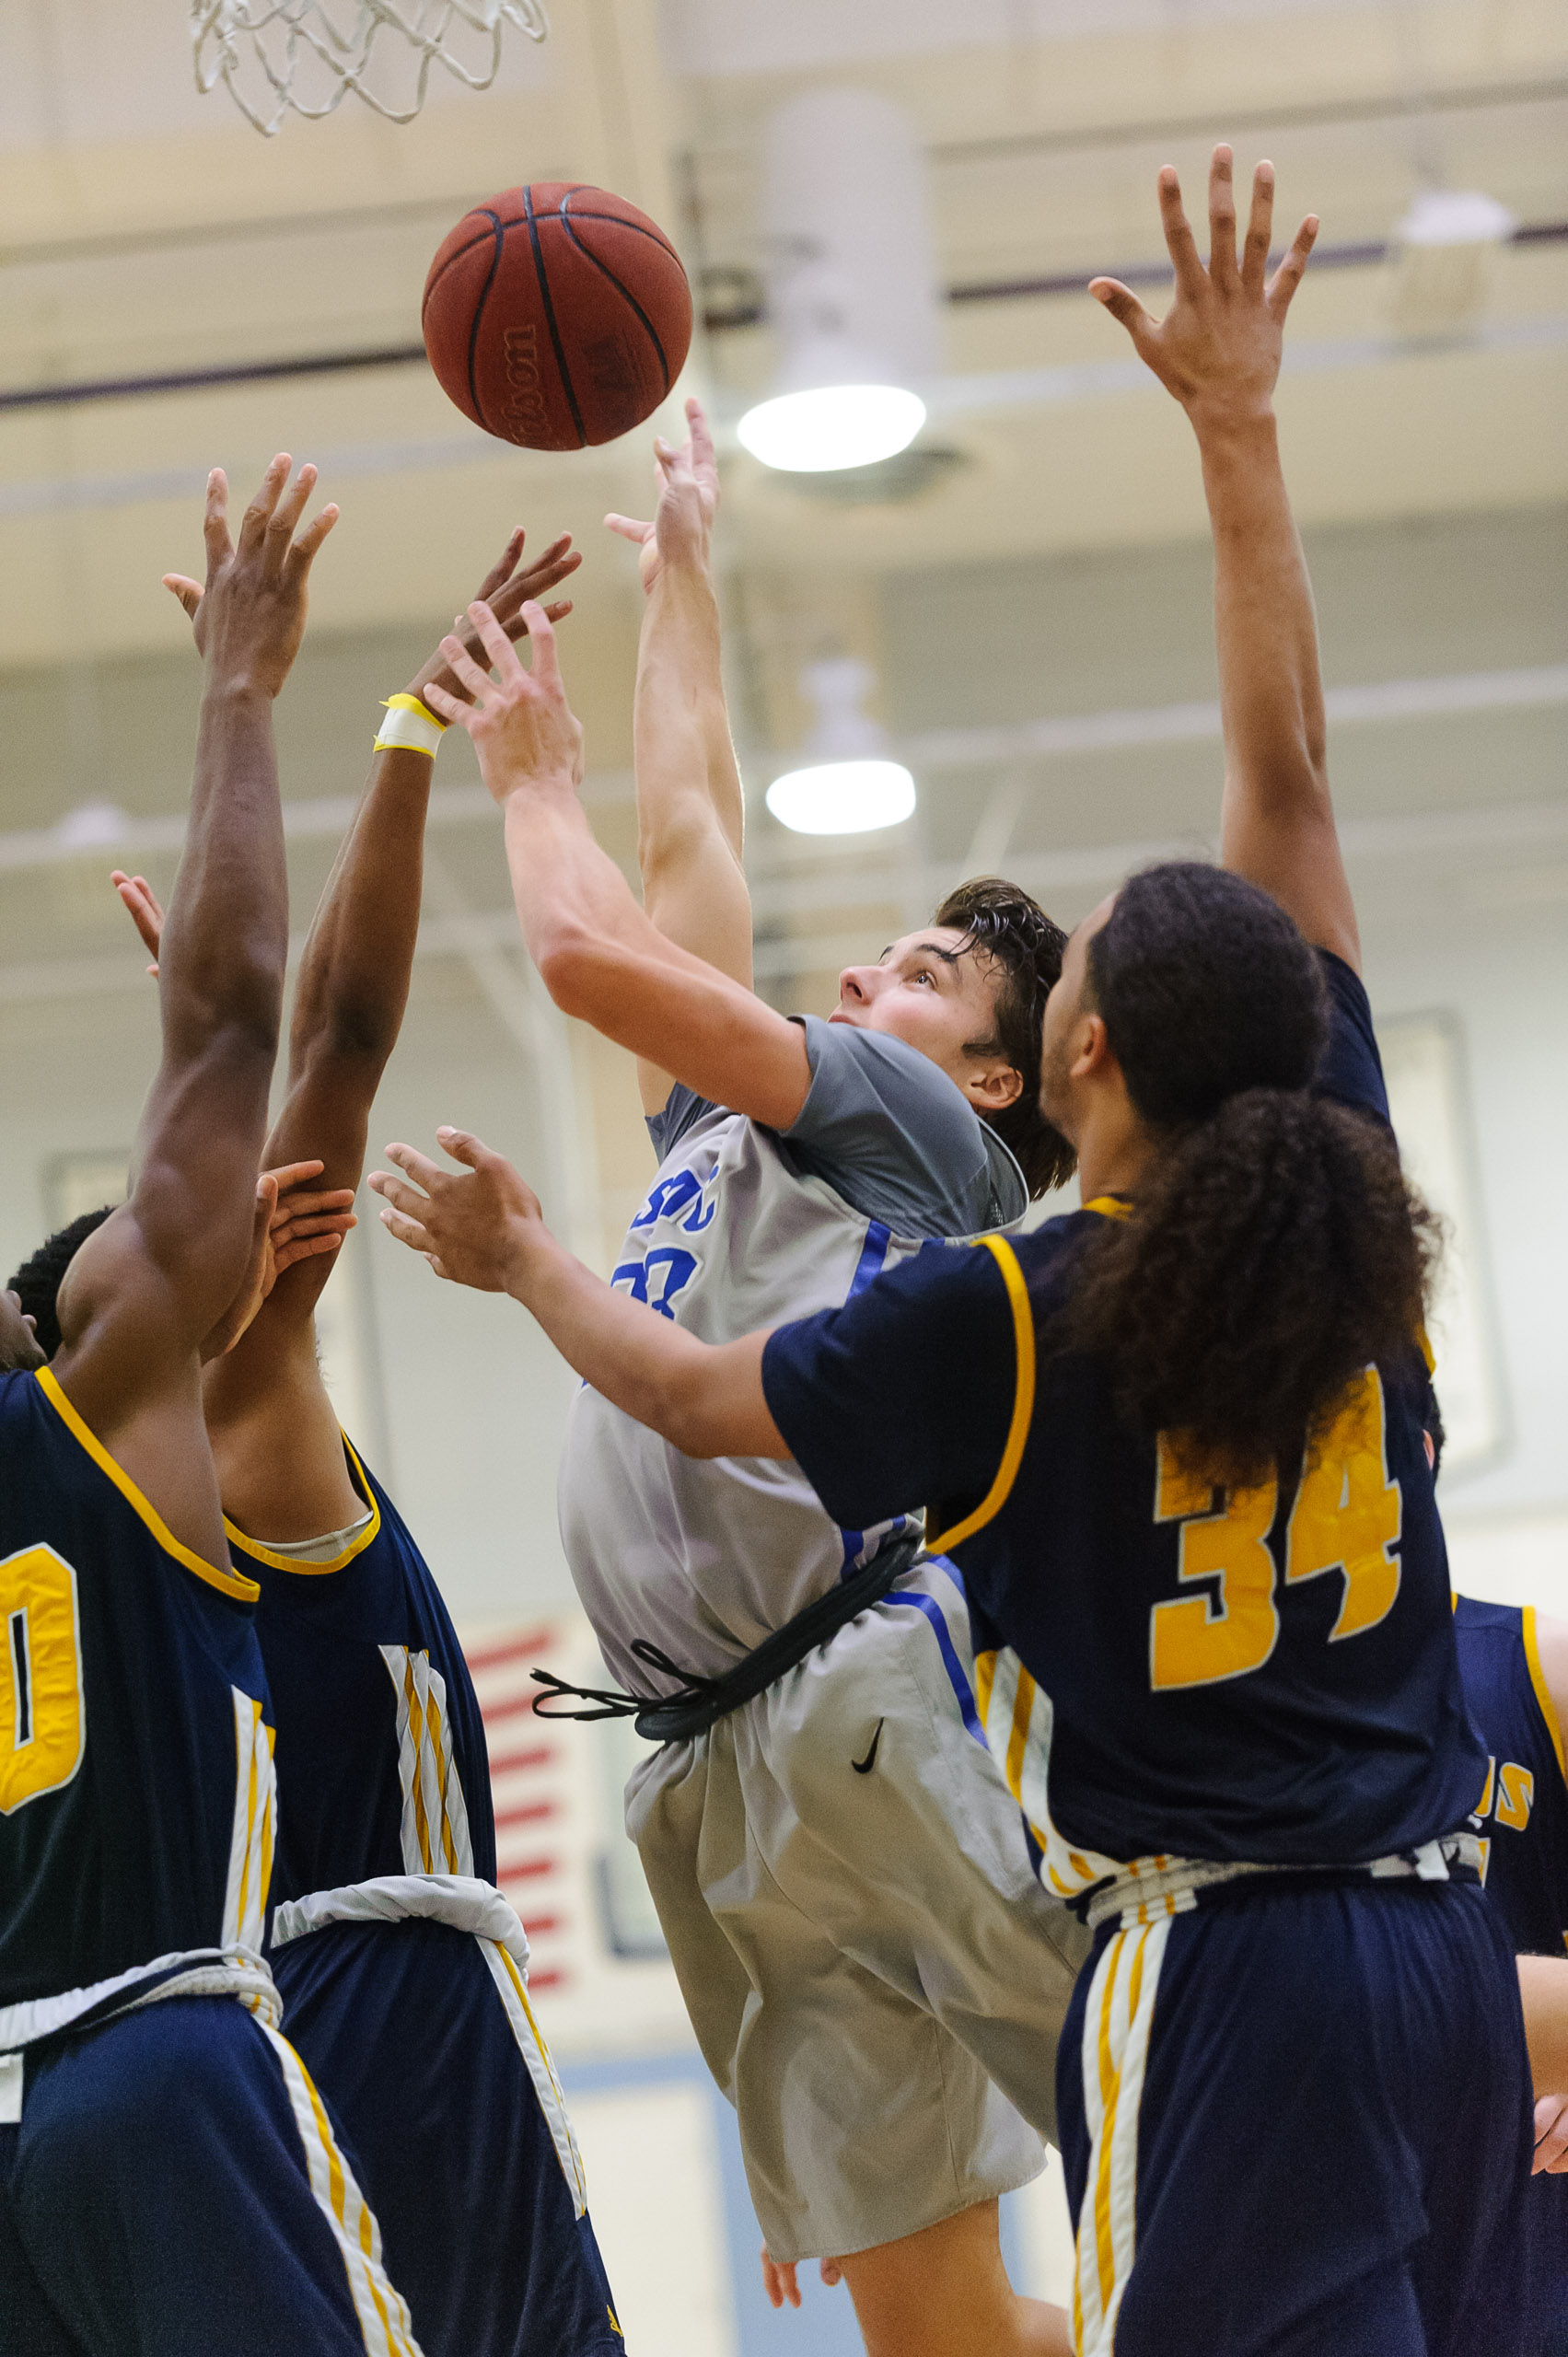  Forward Dayne Downey (23,Middle) of Santa Monica College goes up for a shot attempt by the basket while contested by College of the Canyons defense. The Santa Monica College Corsairs lose the game 74-72 to the College of the Canyons Cougars. The gam